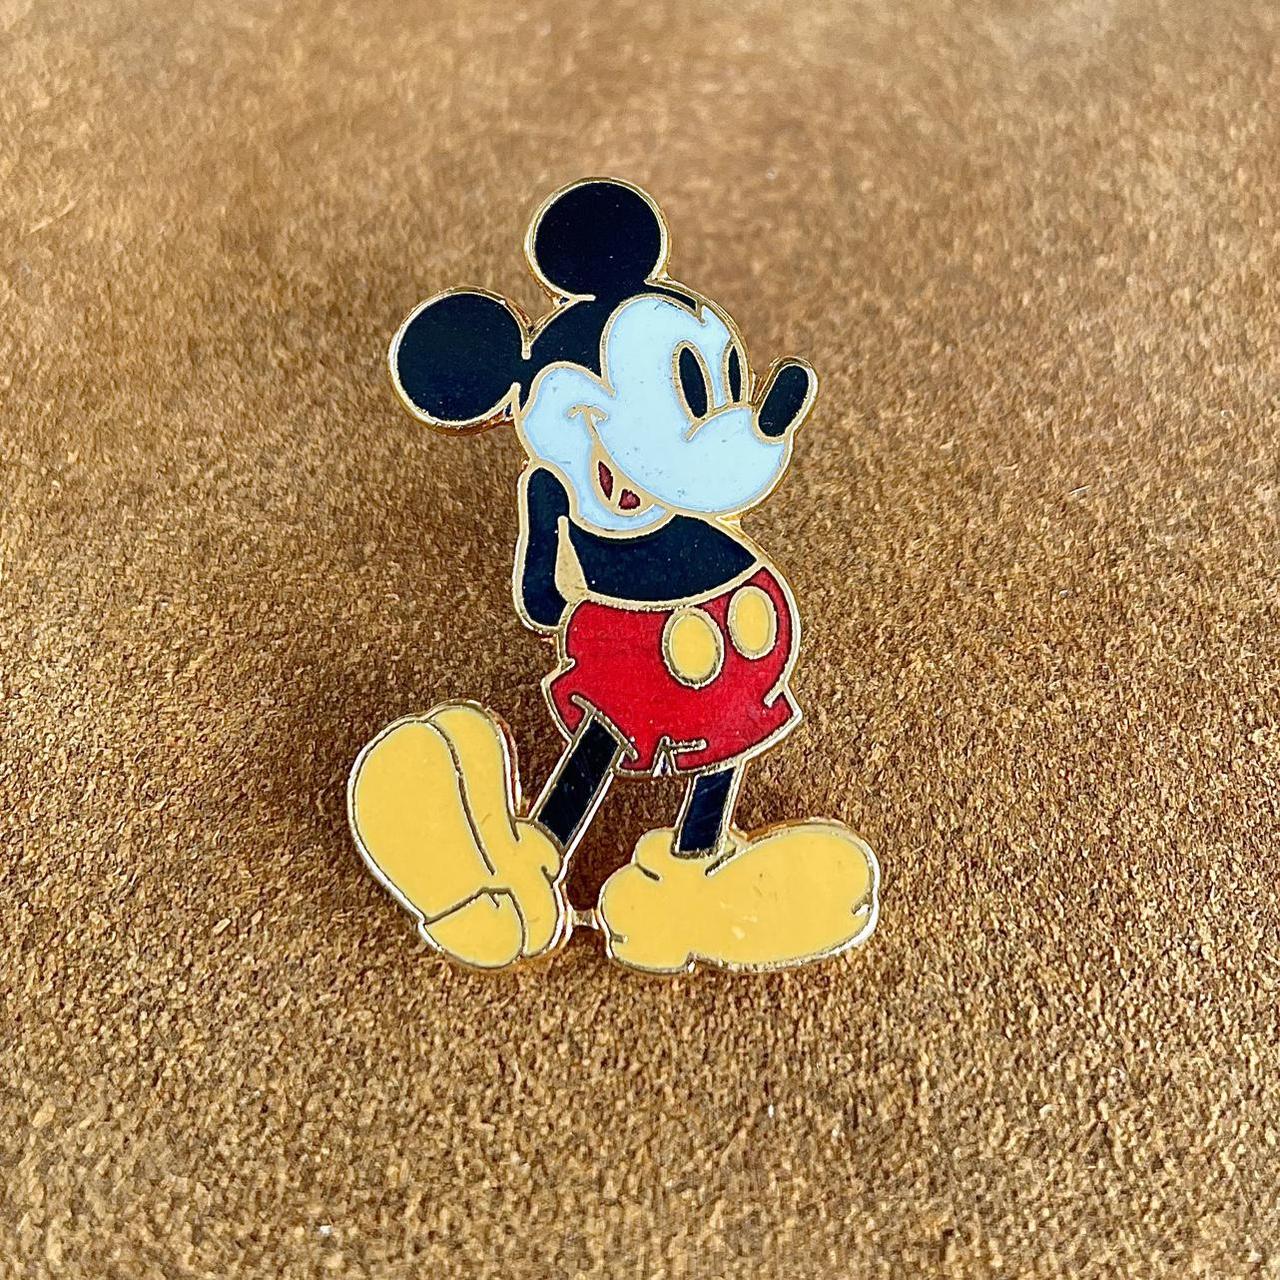 Product Image 1 - Mickey Mouse Pin
💌 free shipping